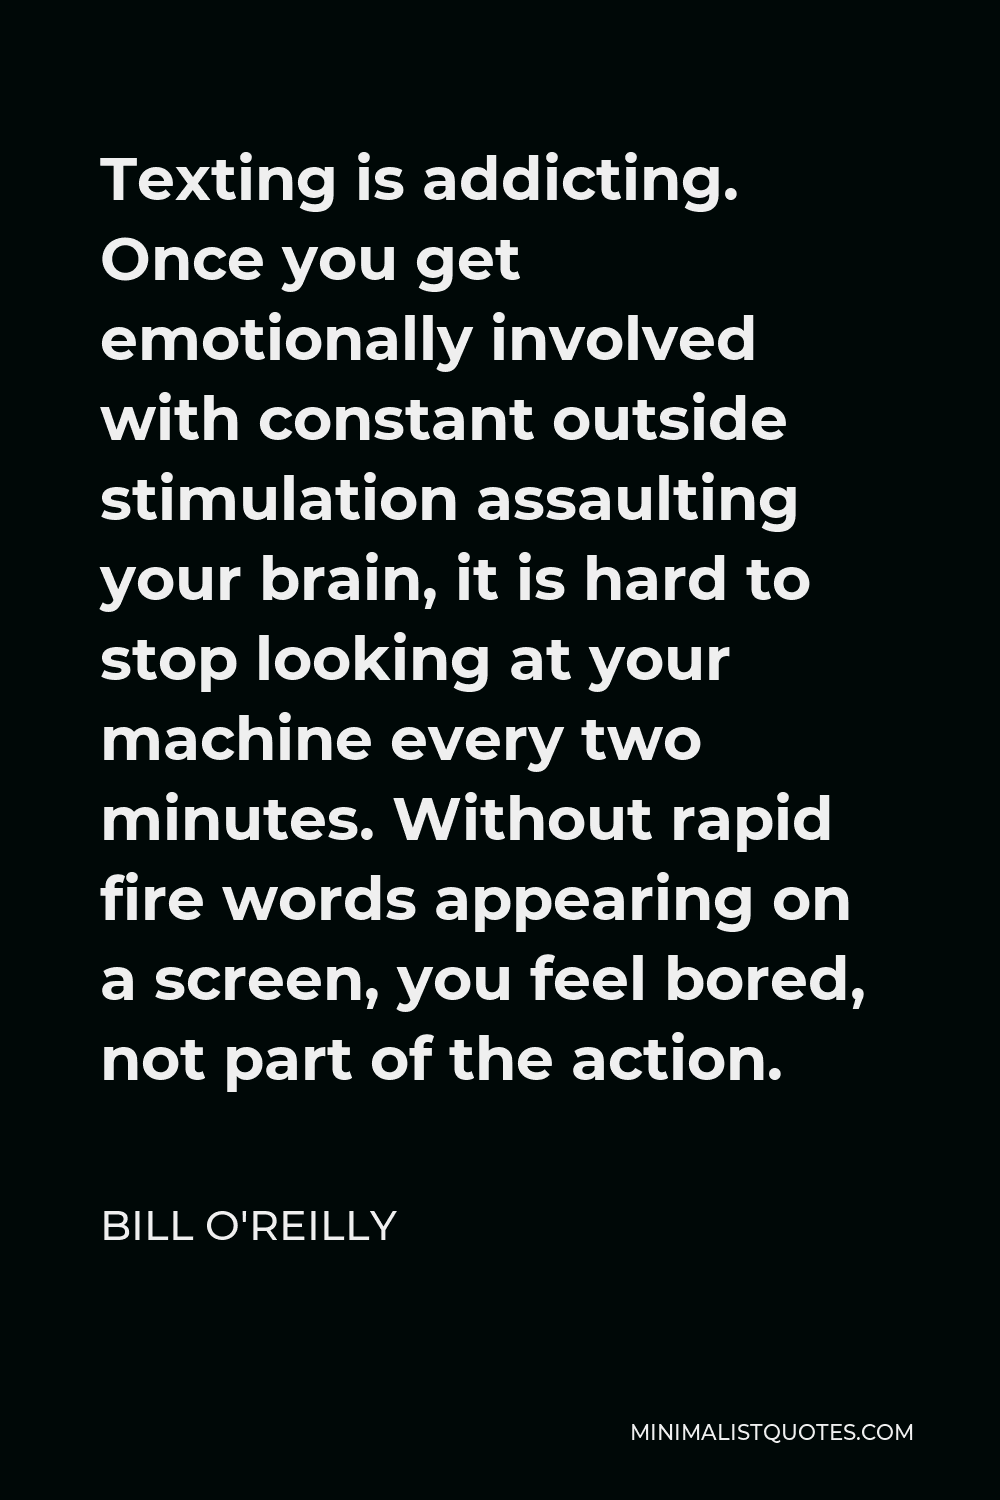 Bill O'Reilly Quote - Texting is addicting. Once you get emotionally involved with constant outside stimulation assaulting your brain, it is hard to stop looking at your machine every two minutes. Without rapid fire words appearing on a screen, you feel bored, not part of the action.